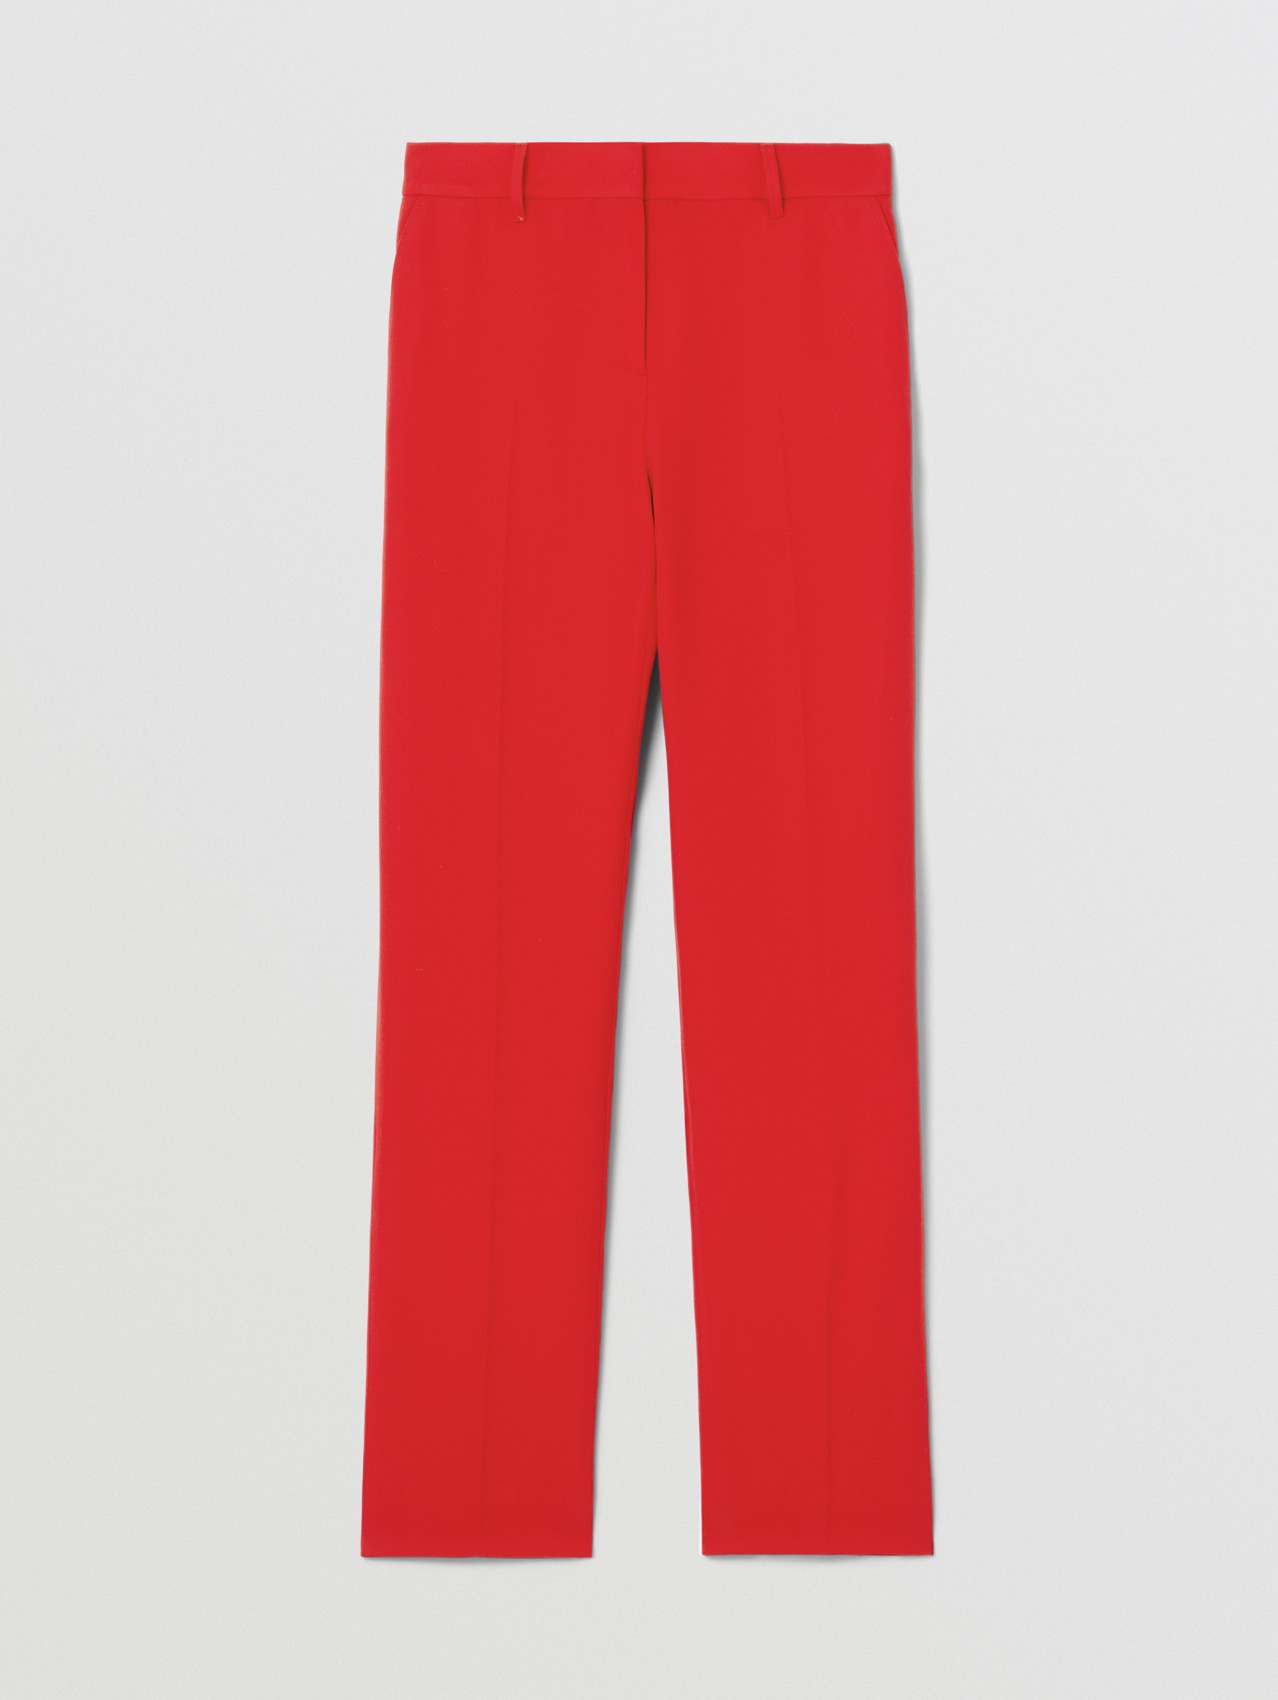 Grain de Poudre Wool Tailored Trousers in Bright Red